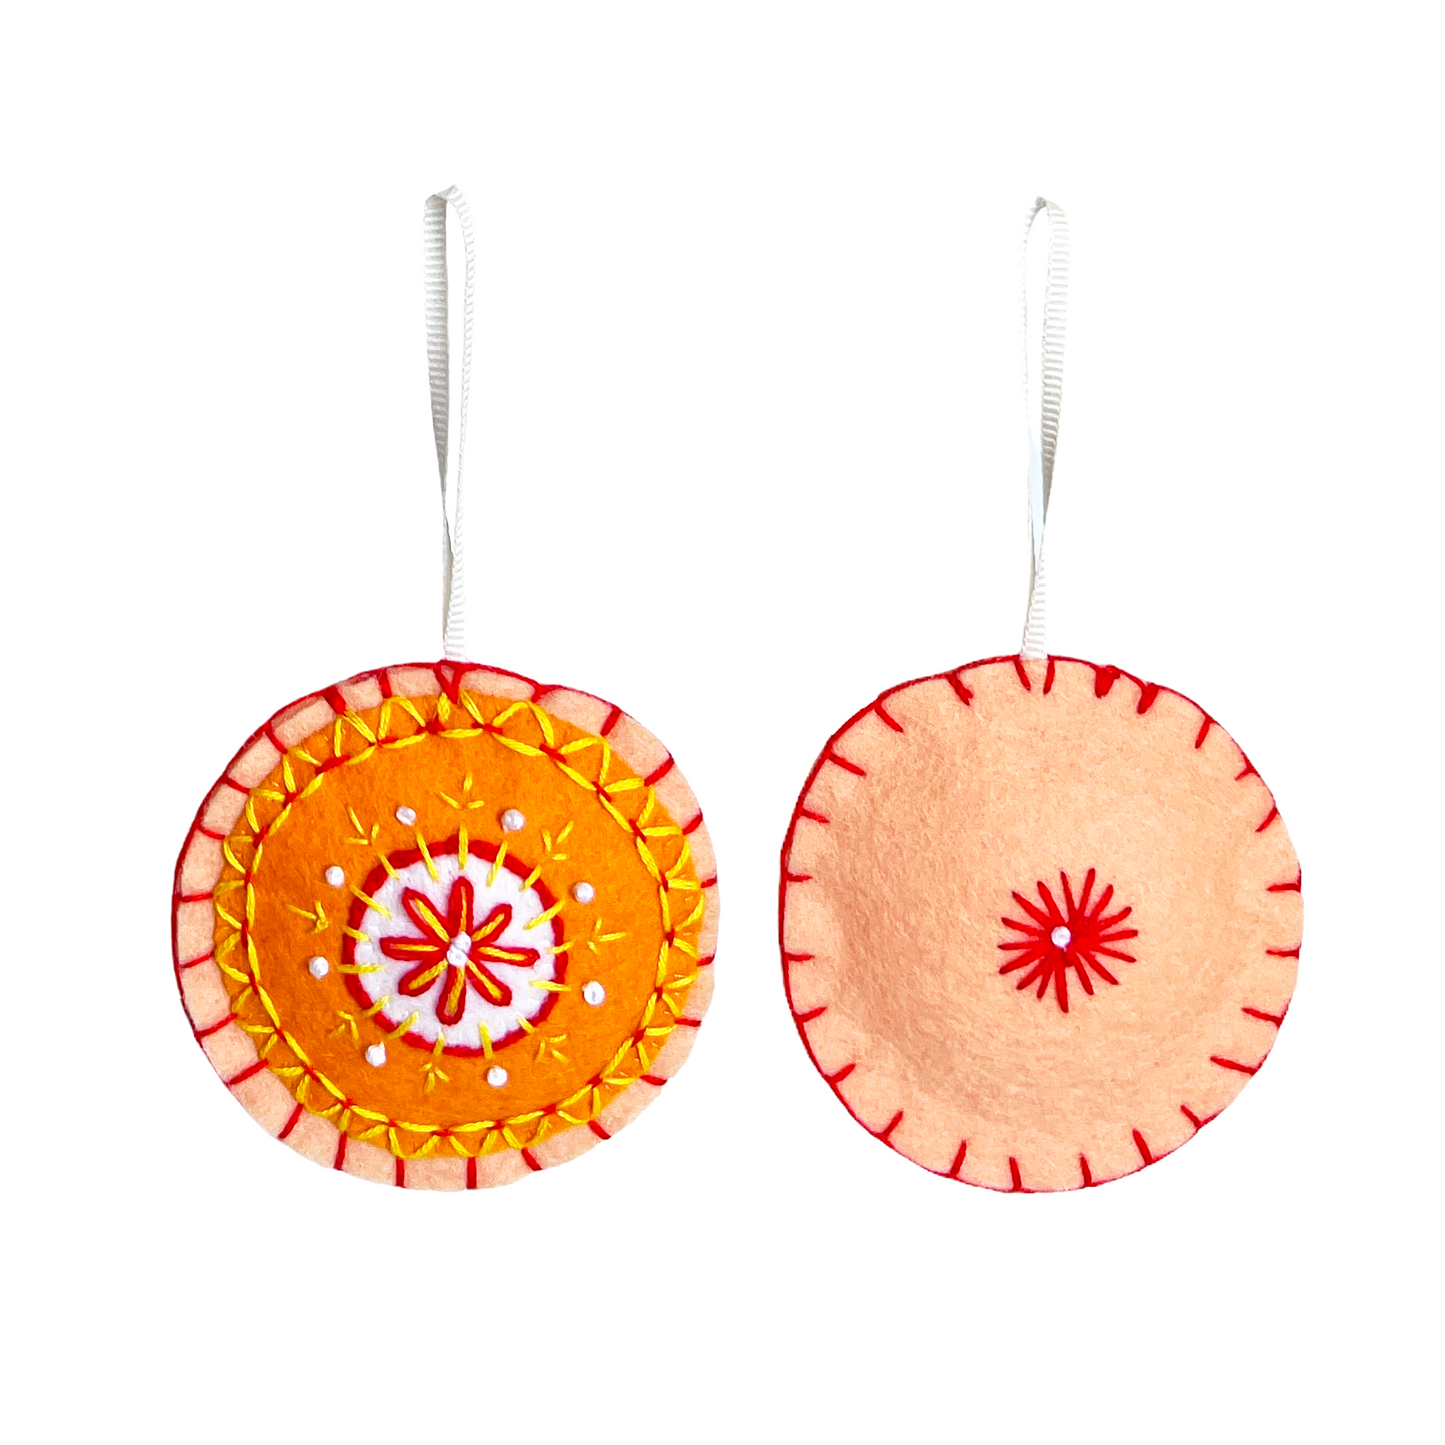 This Mini Mandala ornament features concentric circles of white, orange, and peach felt with a matching peach felt back. Both sides are embroidered using orange, yellow, and white threads in a symmetrical, mandala-inspired design.